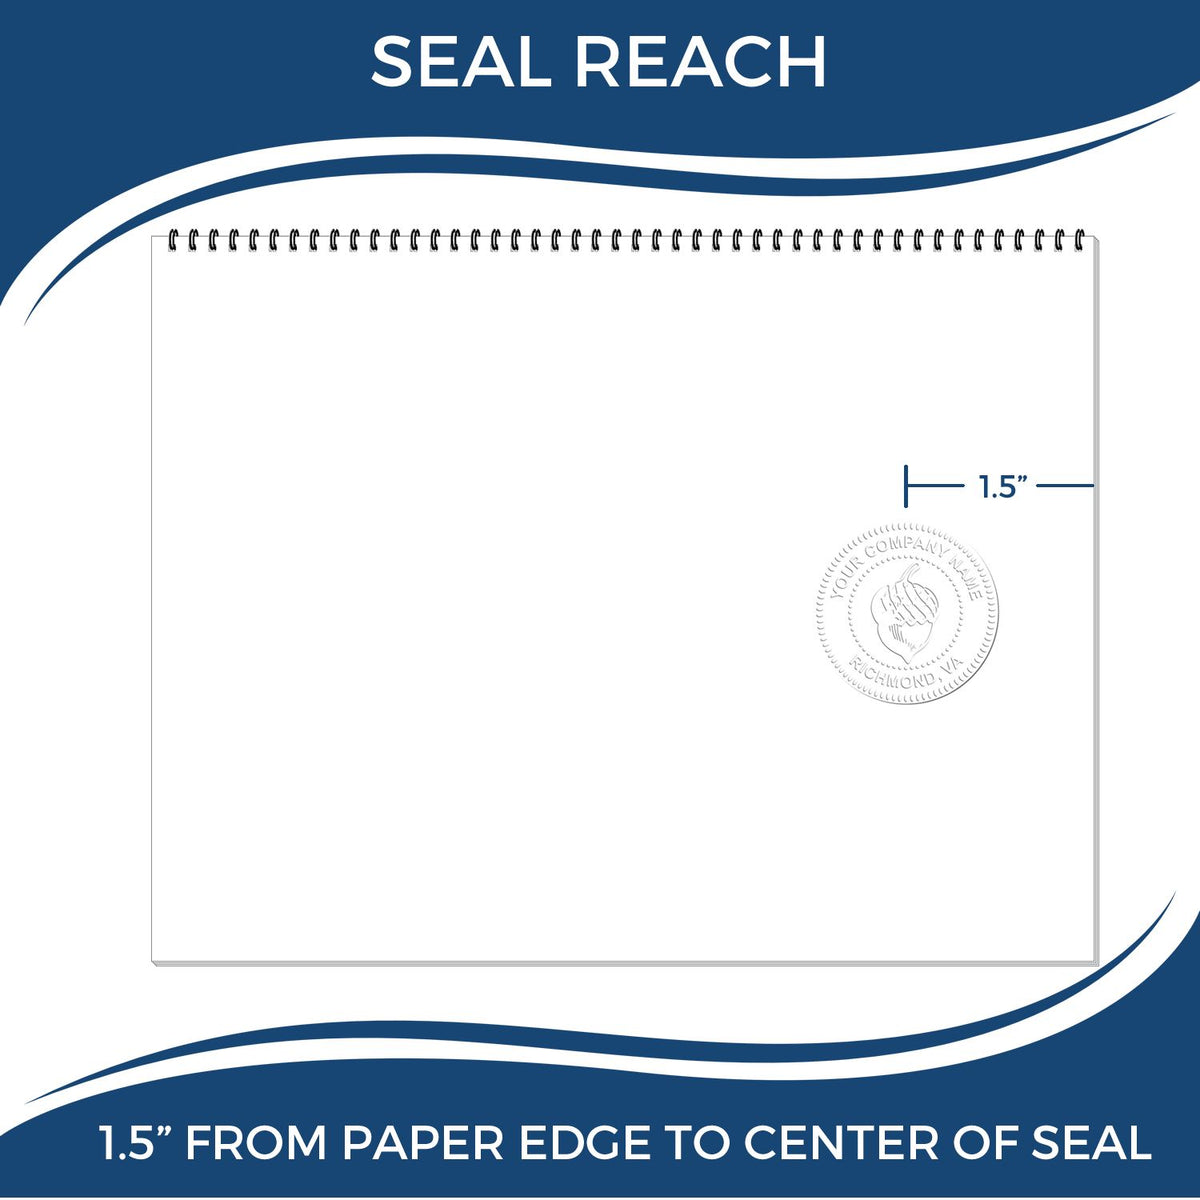 An infographic showing the seal reach which is represented by a ruler and a miniature seal image of the Handheld Mississippi Architect Seal Embosser